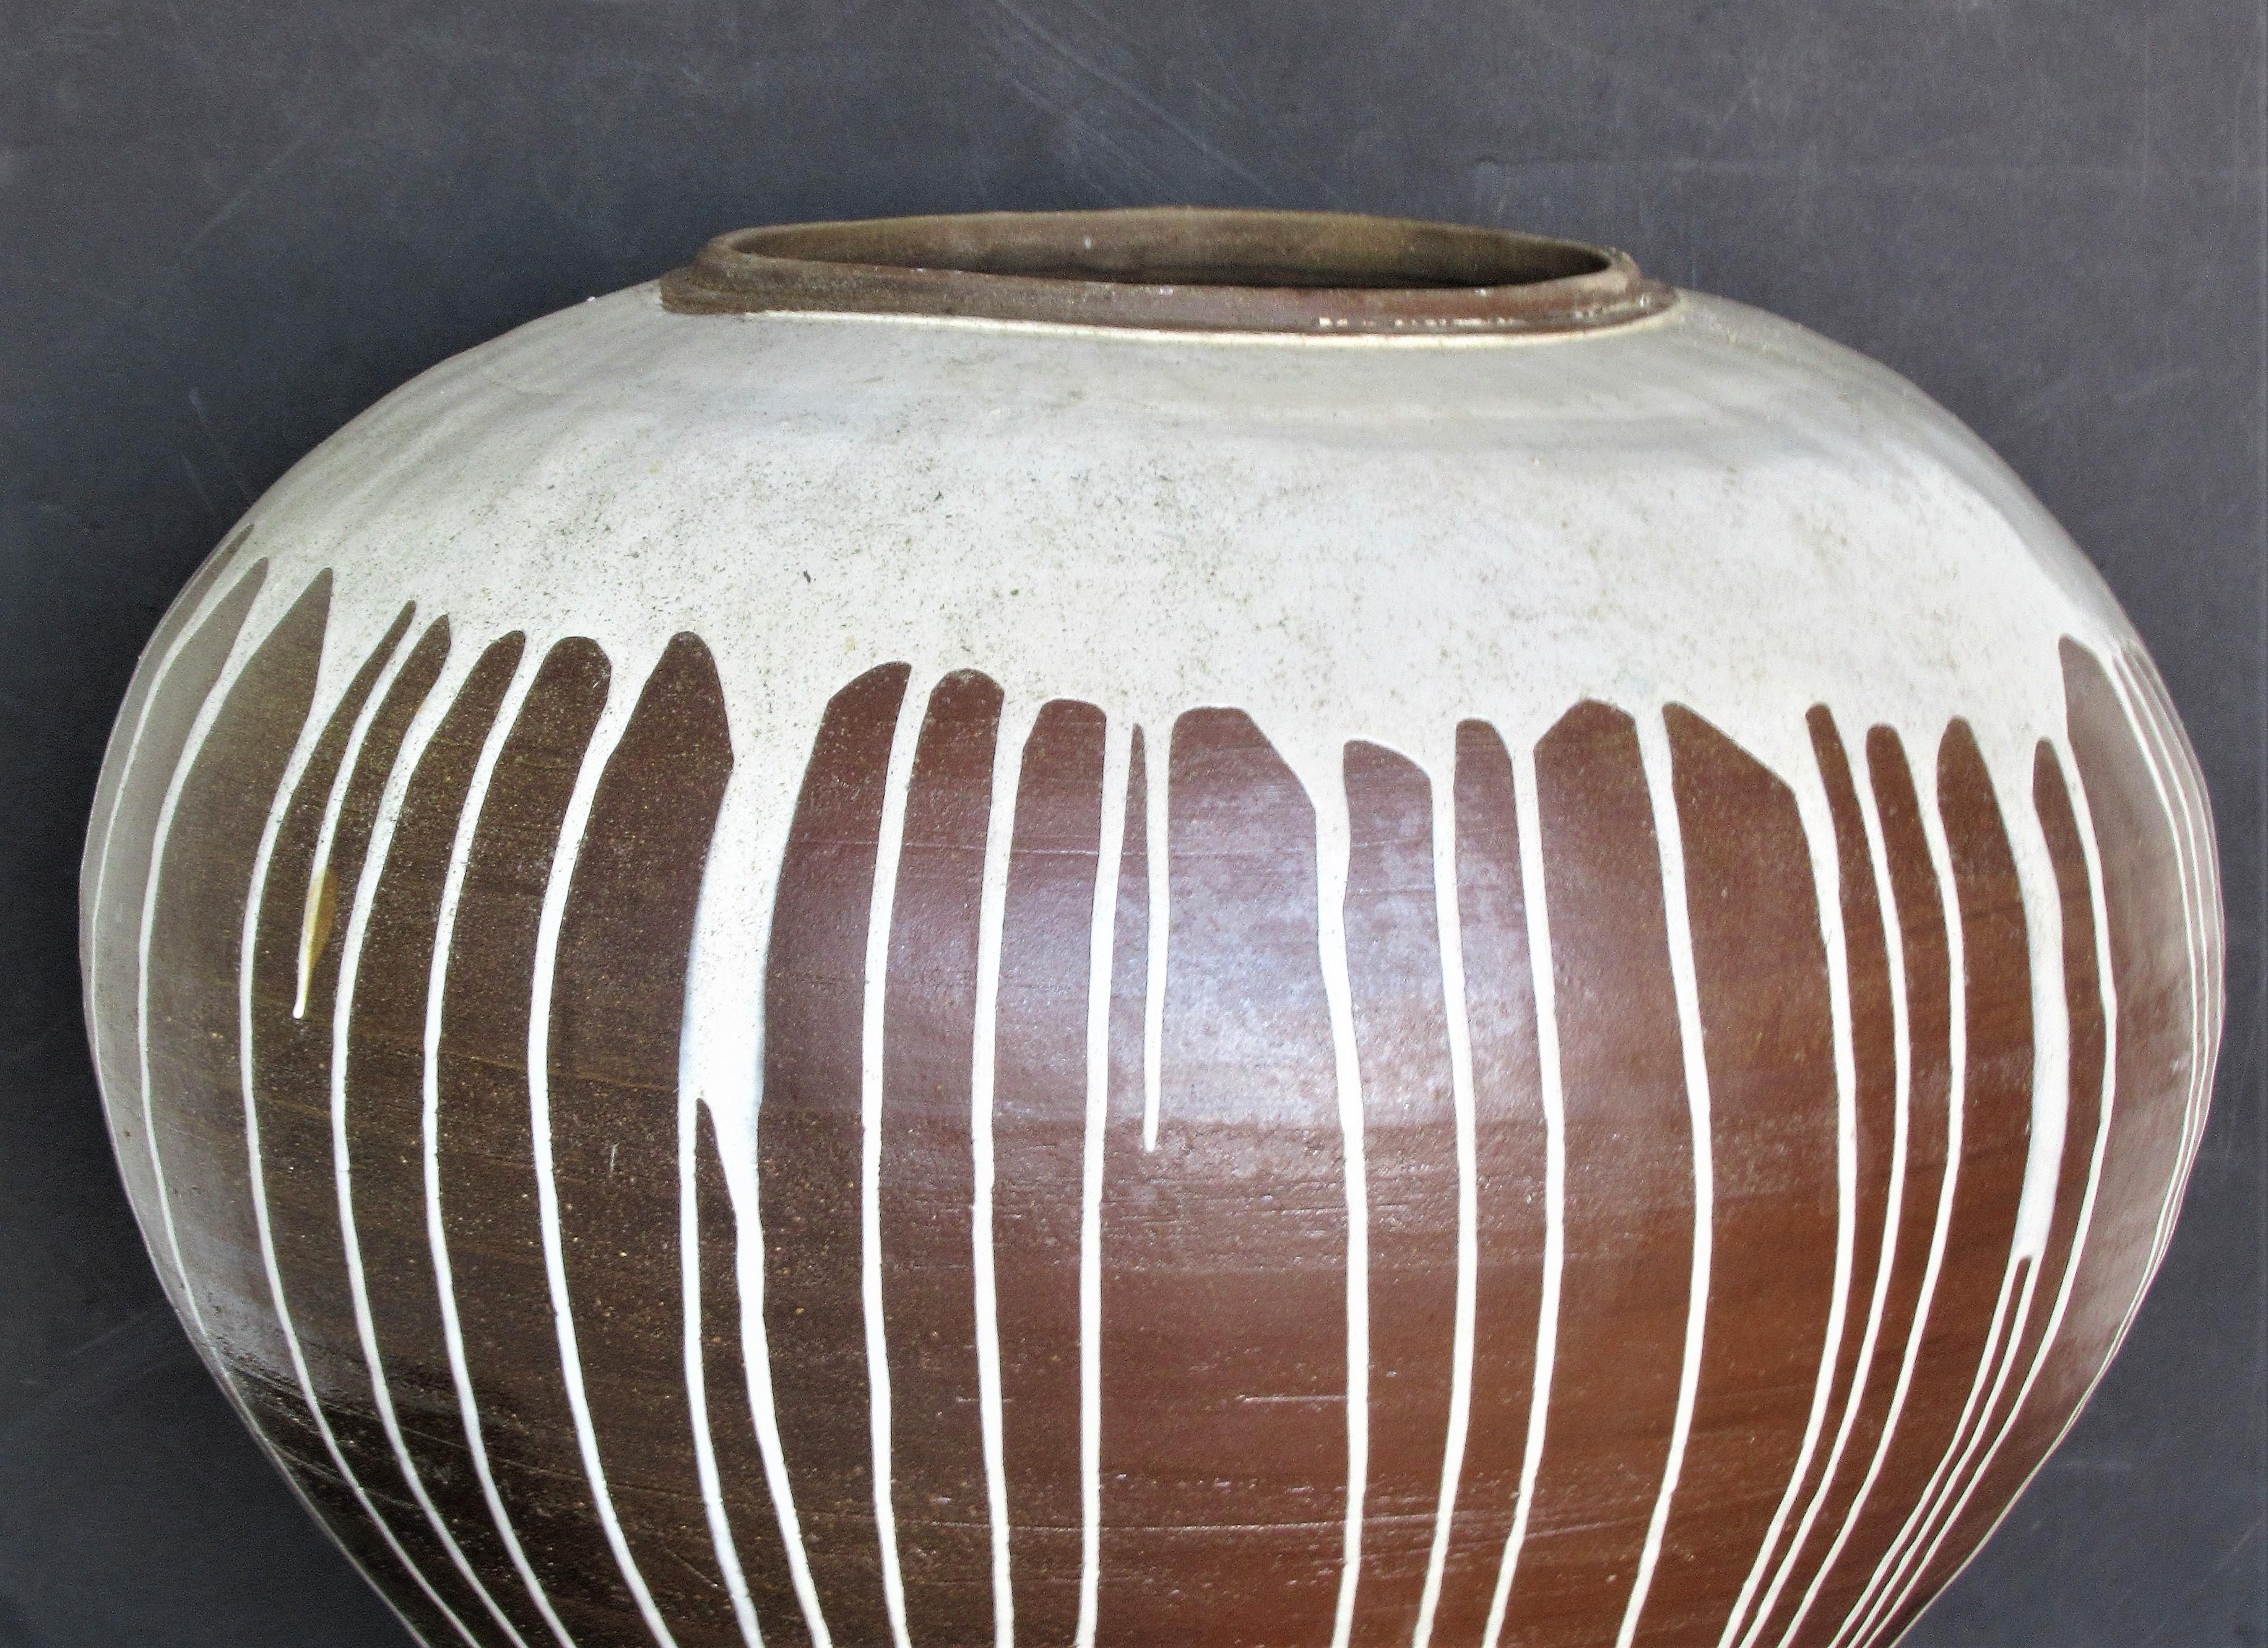 A massive bulbous ovoid glazed stoneware ceramic vase. A contemporary work from The School for American Craftsmen at Rochester Institute of Technology. No apparent signature. This is a beauty. Look at all pictures and read condition report in